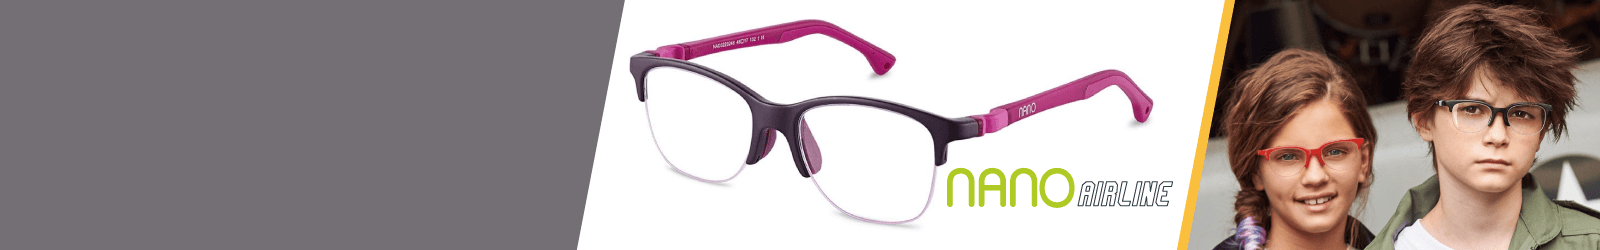 Indigo Nano Airline Kids Glasses from 4 to 6-year-old